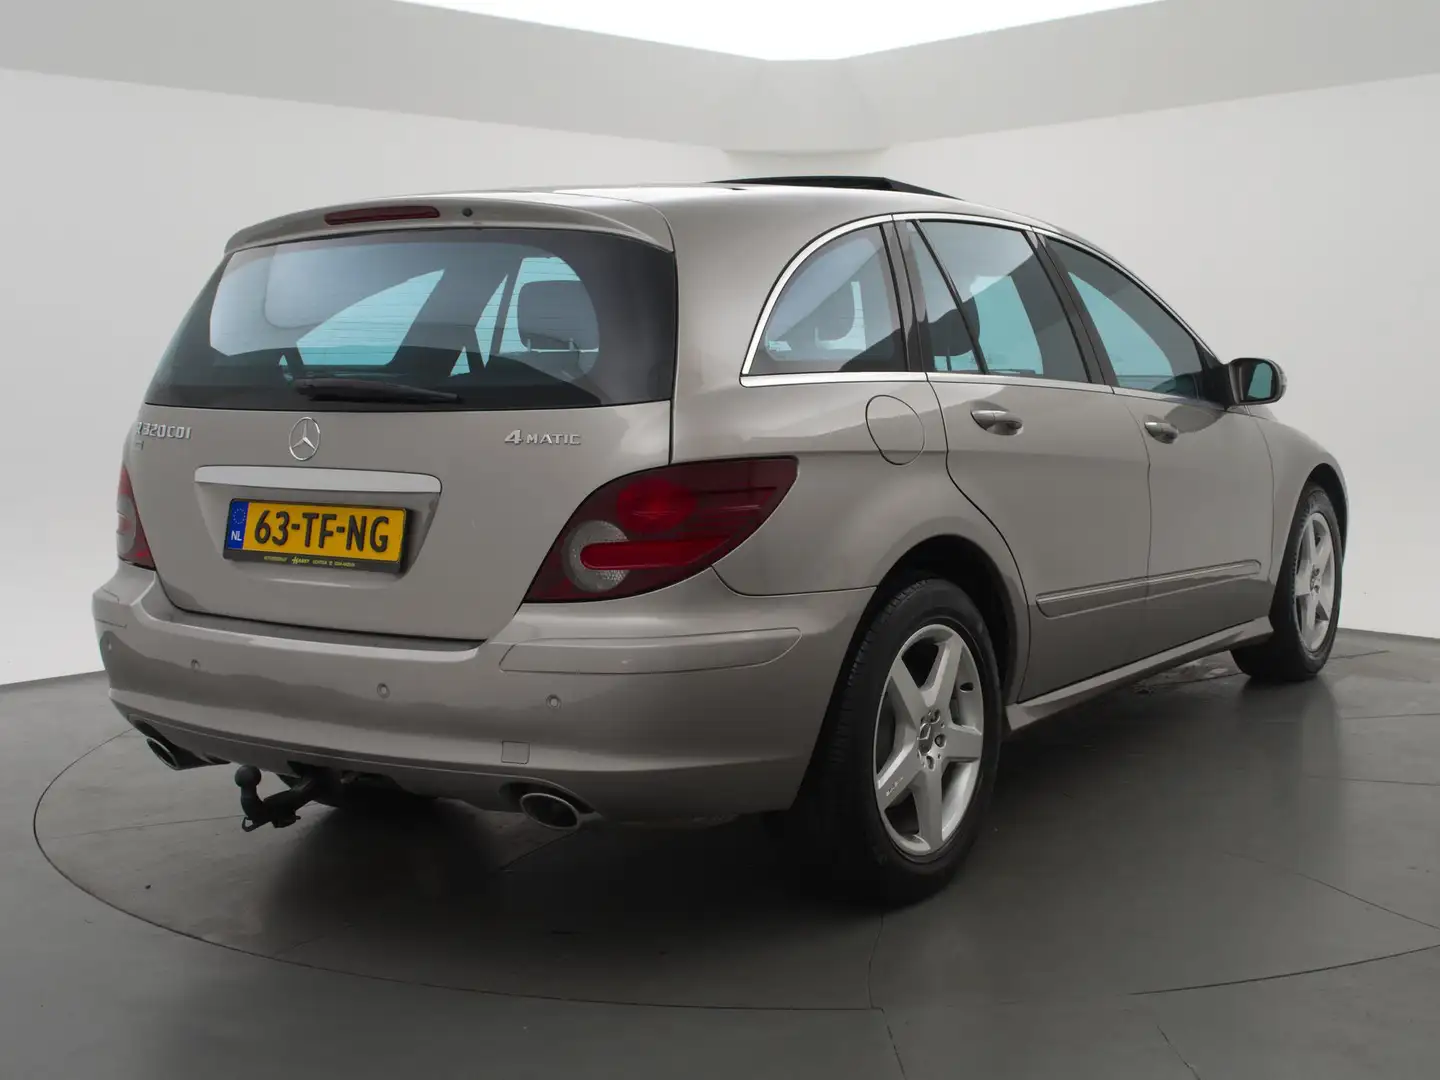 Mercedes-Benz R 320 CDI 4-MATIC 6-PERS. *184.762 KM* YOUNGTIMER Gri - 2